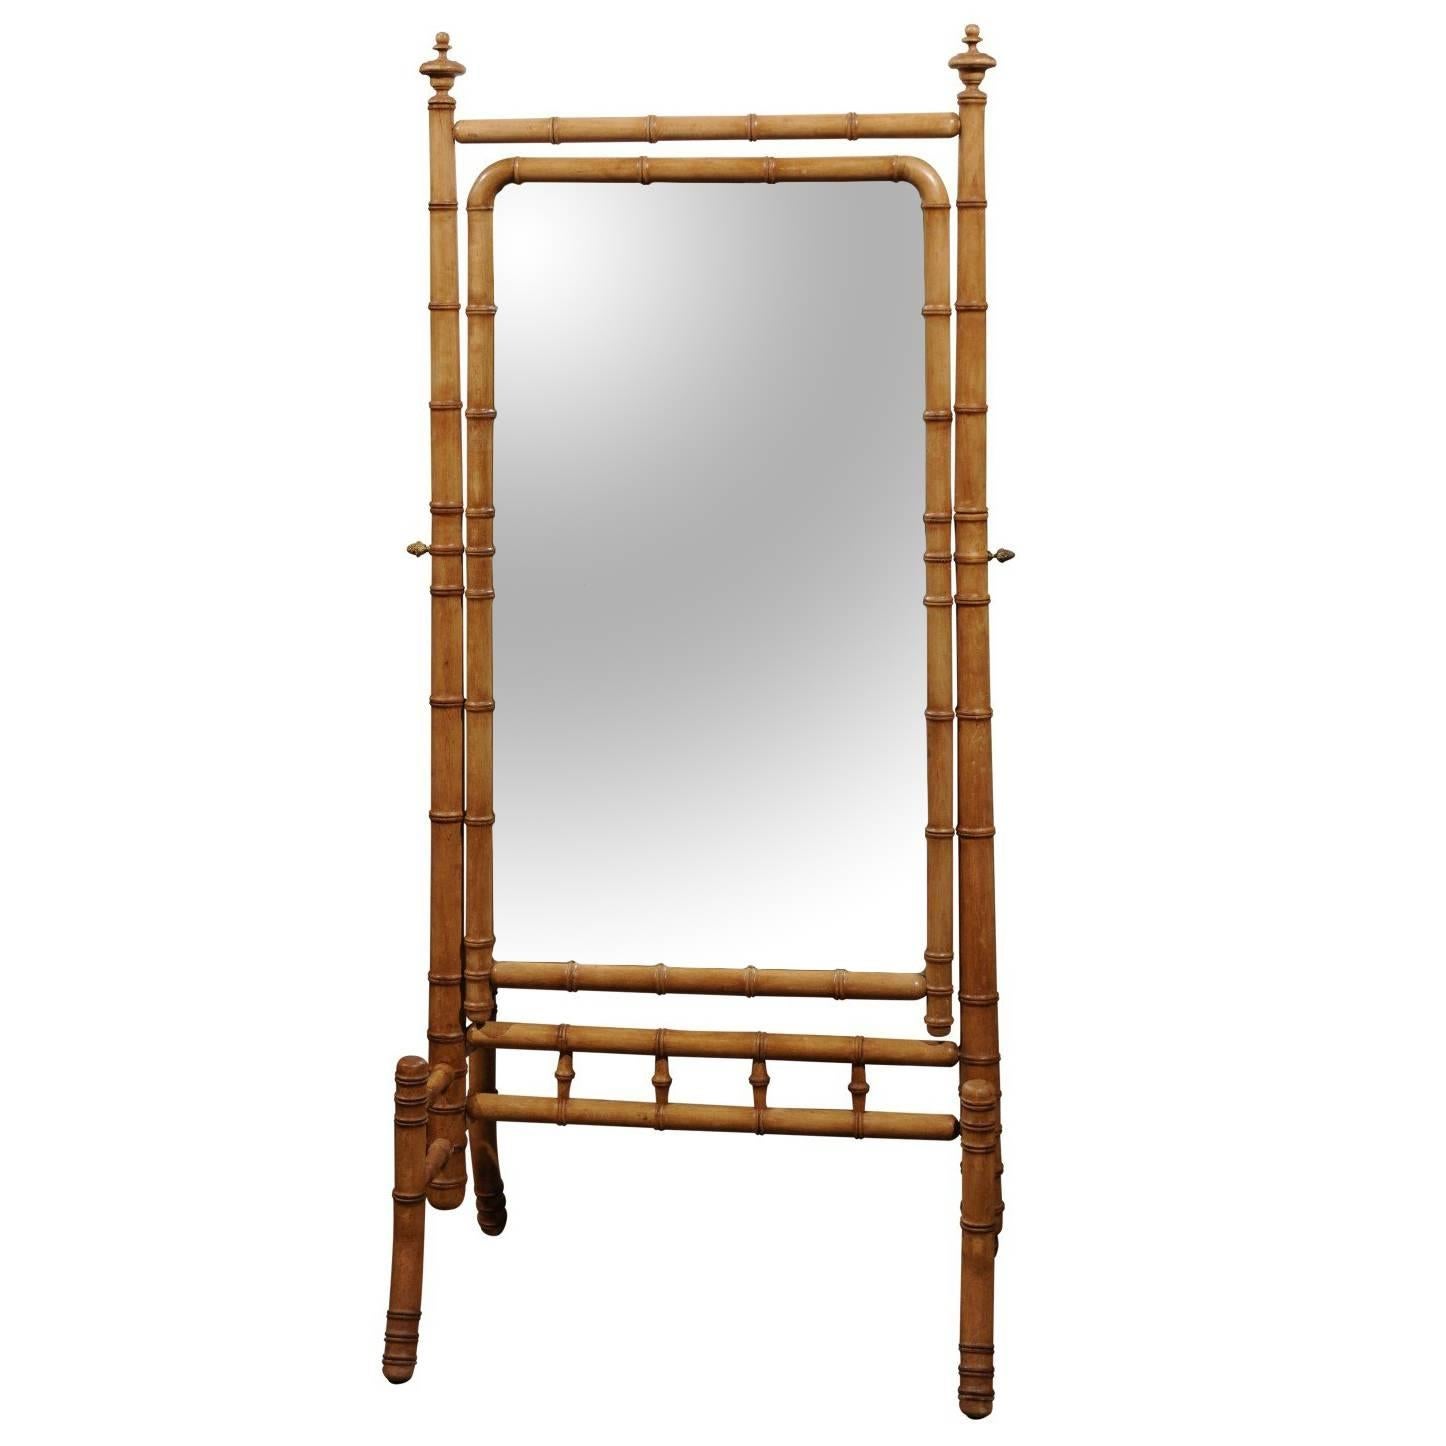 French Freestanding Faux-Bamboo Cheval Mirror with Saber Legs from the 1870s